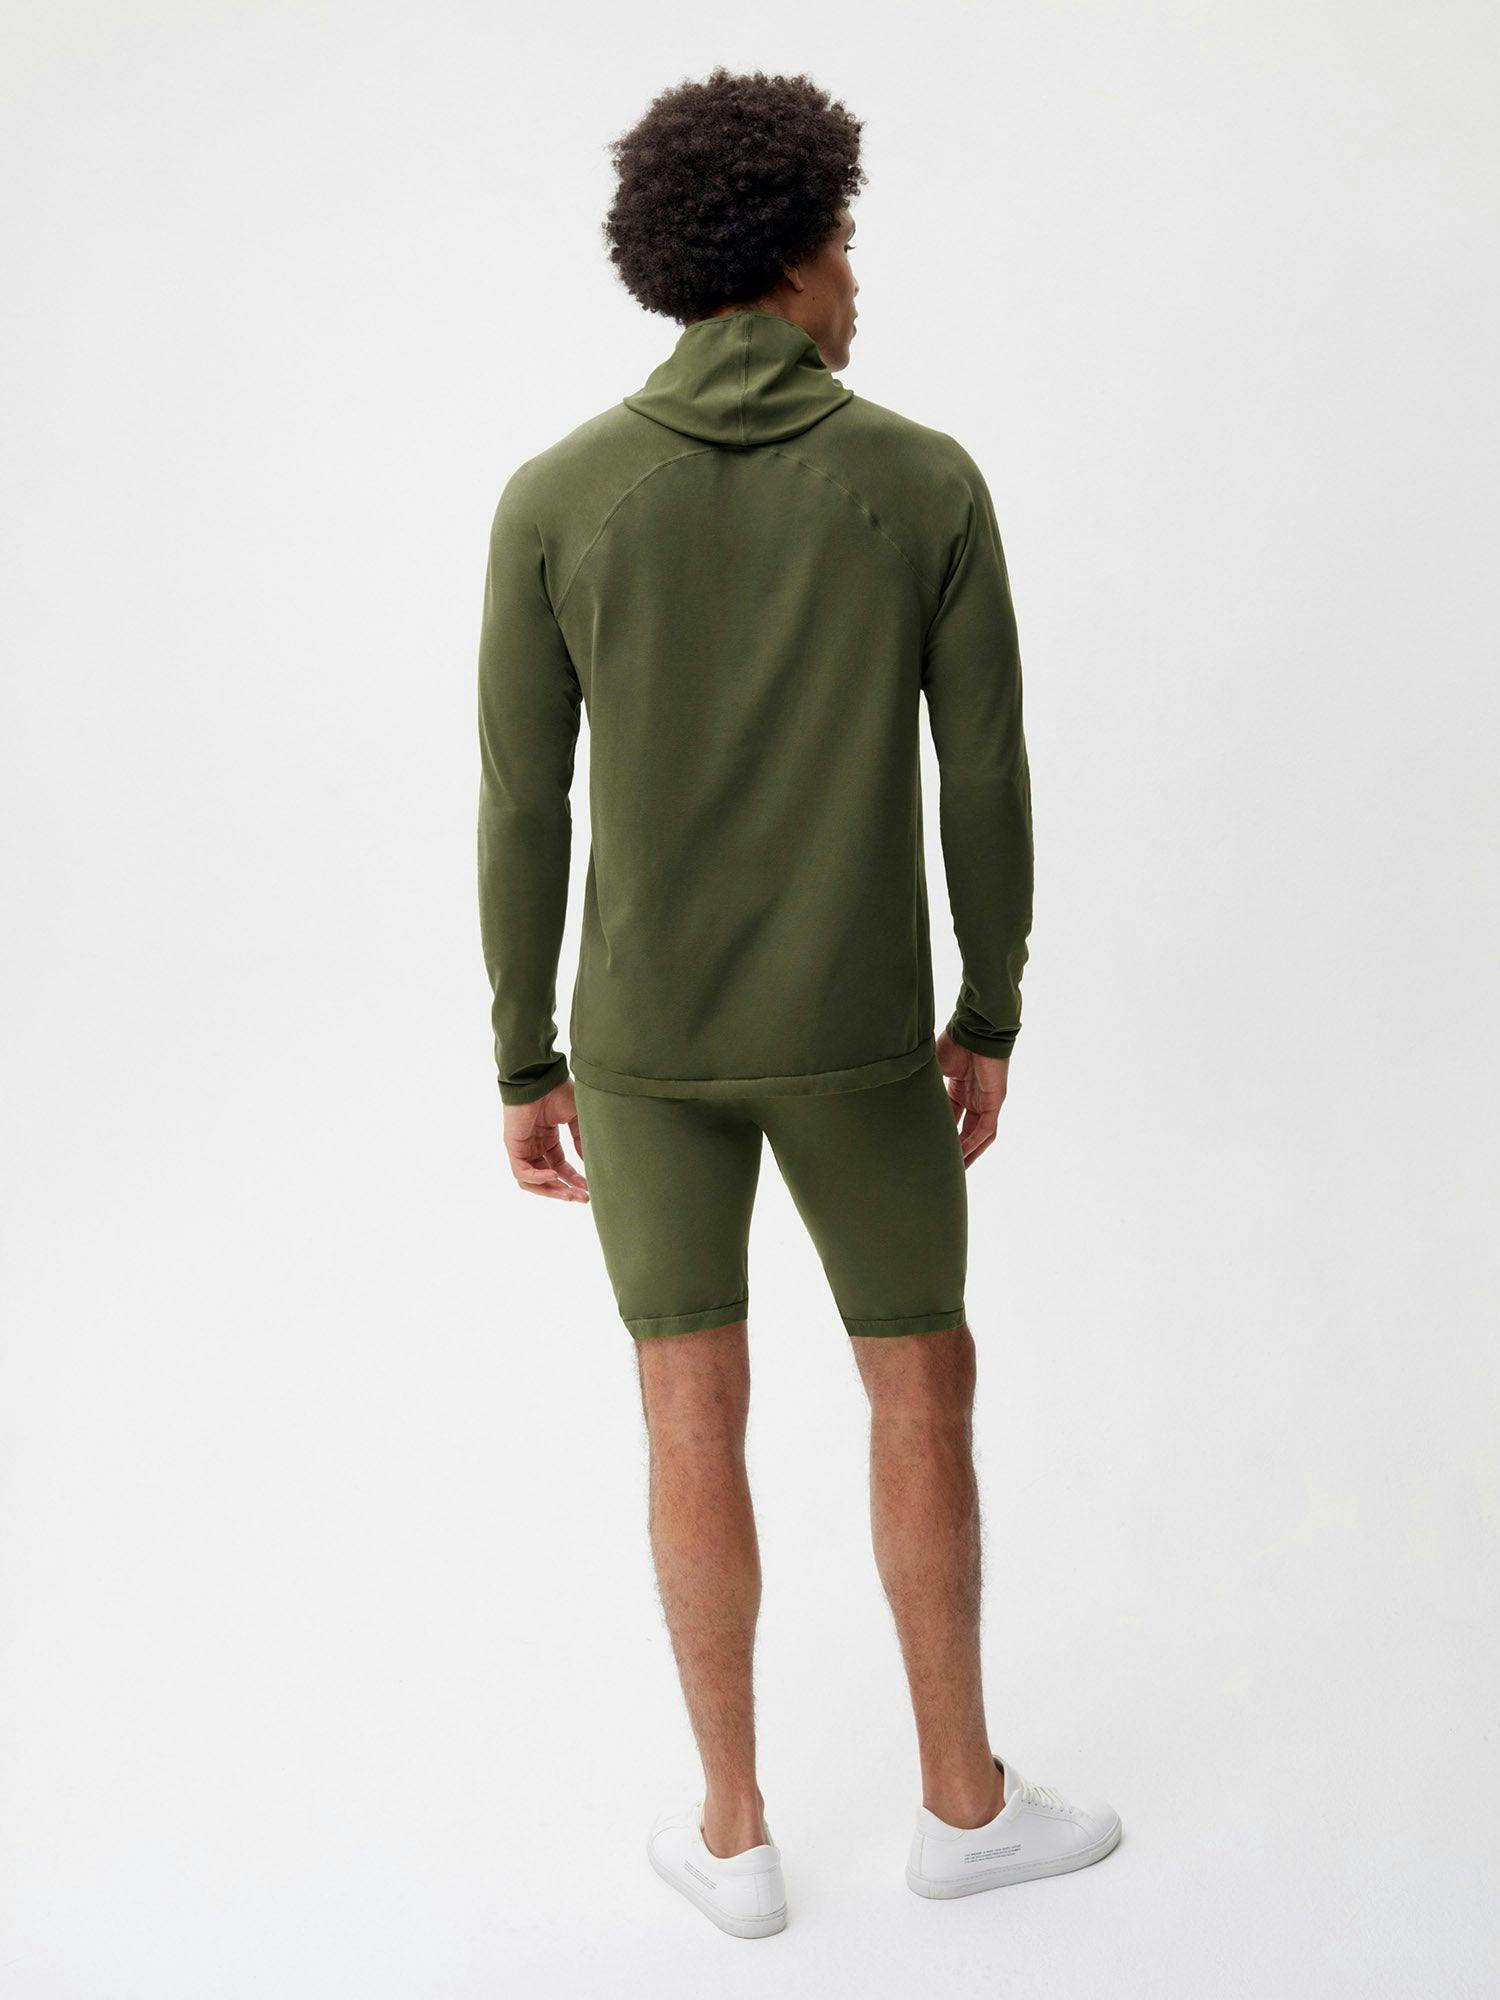 https://cdn.shopify.com/s/files/1/0035/1309/0115/products/Activewear-Mens-Hoodie-Rosemary-Green-2.jpg?v=1662475878